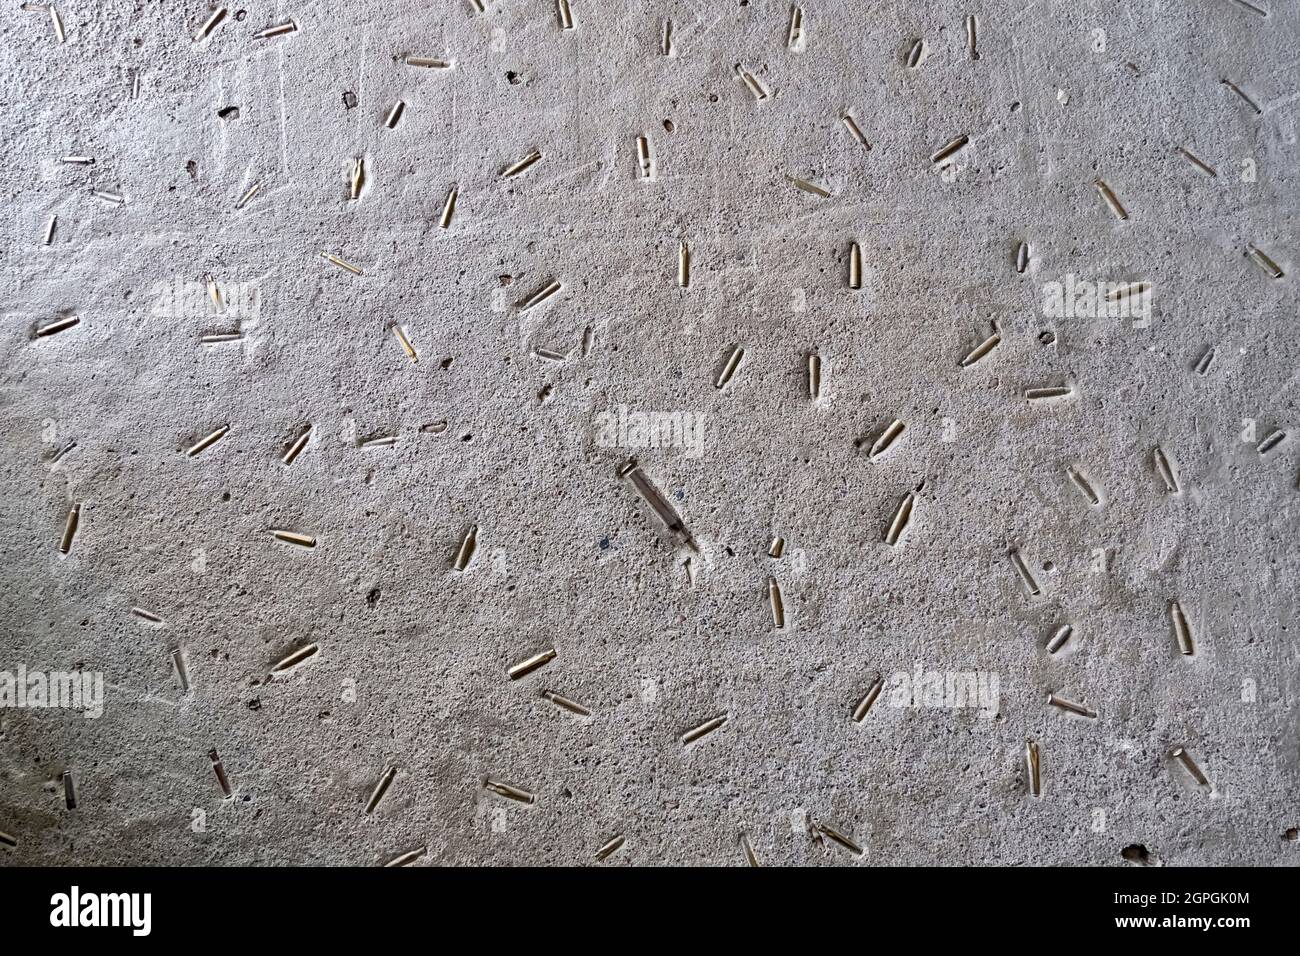 Croatia, Slavonia, Ovcara, the Ovcara memorial (Spomen Dom Ovcara), rifle bullets embedded in the ground, November 20, 1991, 264 people from Vukovar hospital will be tortured and executed by Serbian forces, 7 people will be indicted by the ICTY for crimes against humanity and war crimes Stock Photo